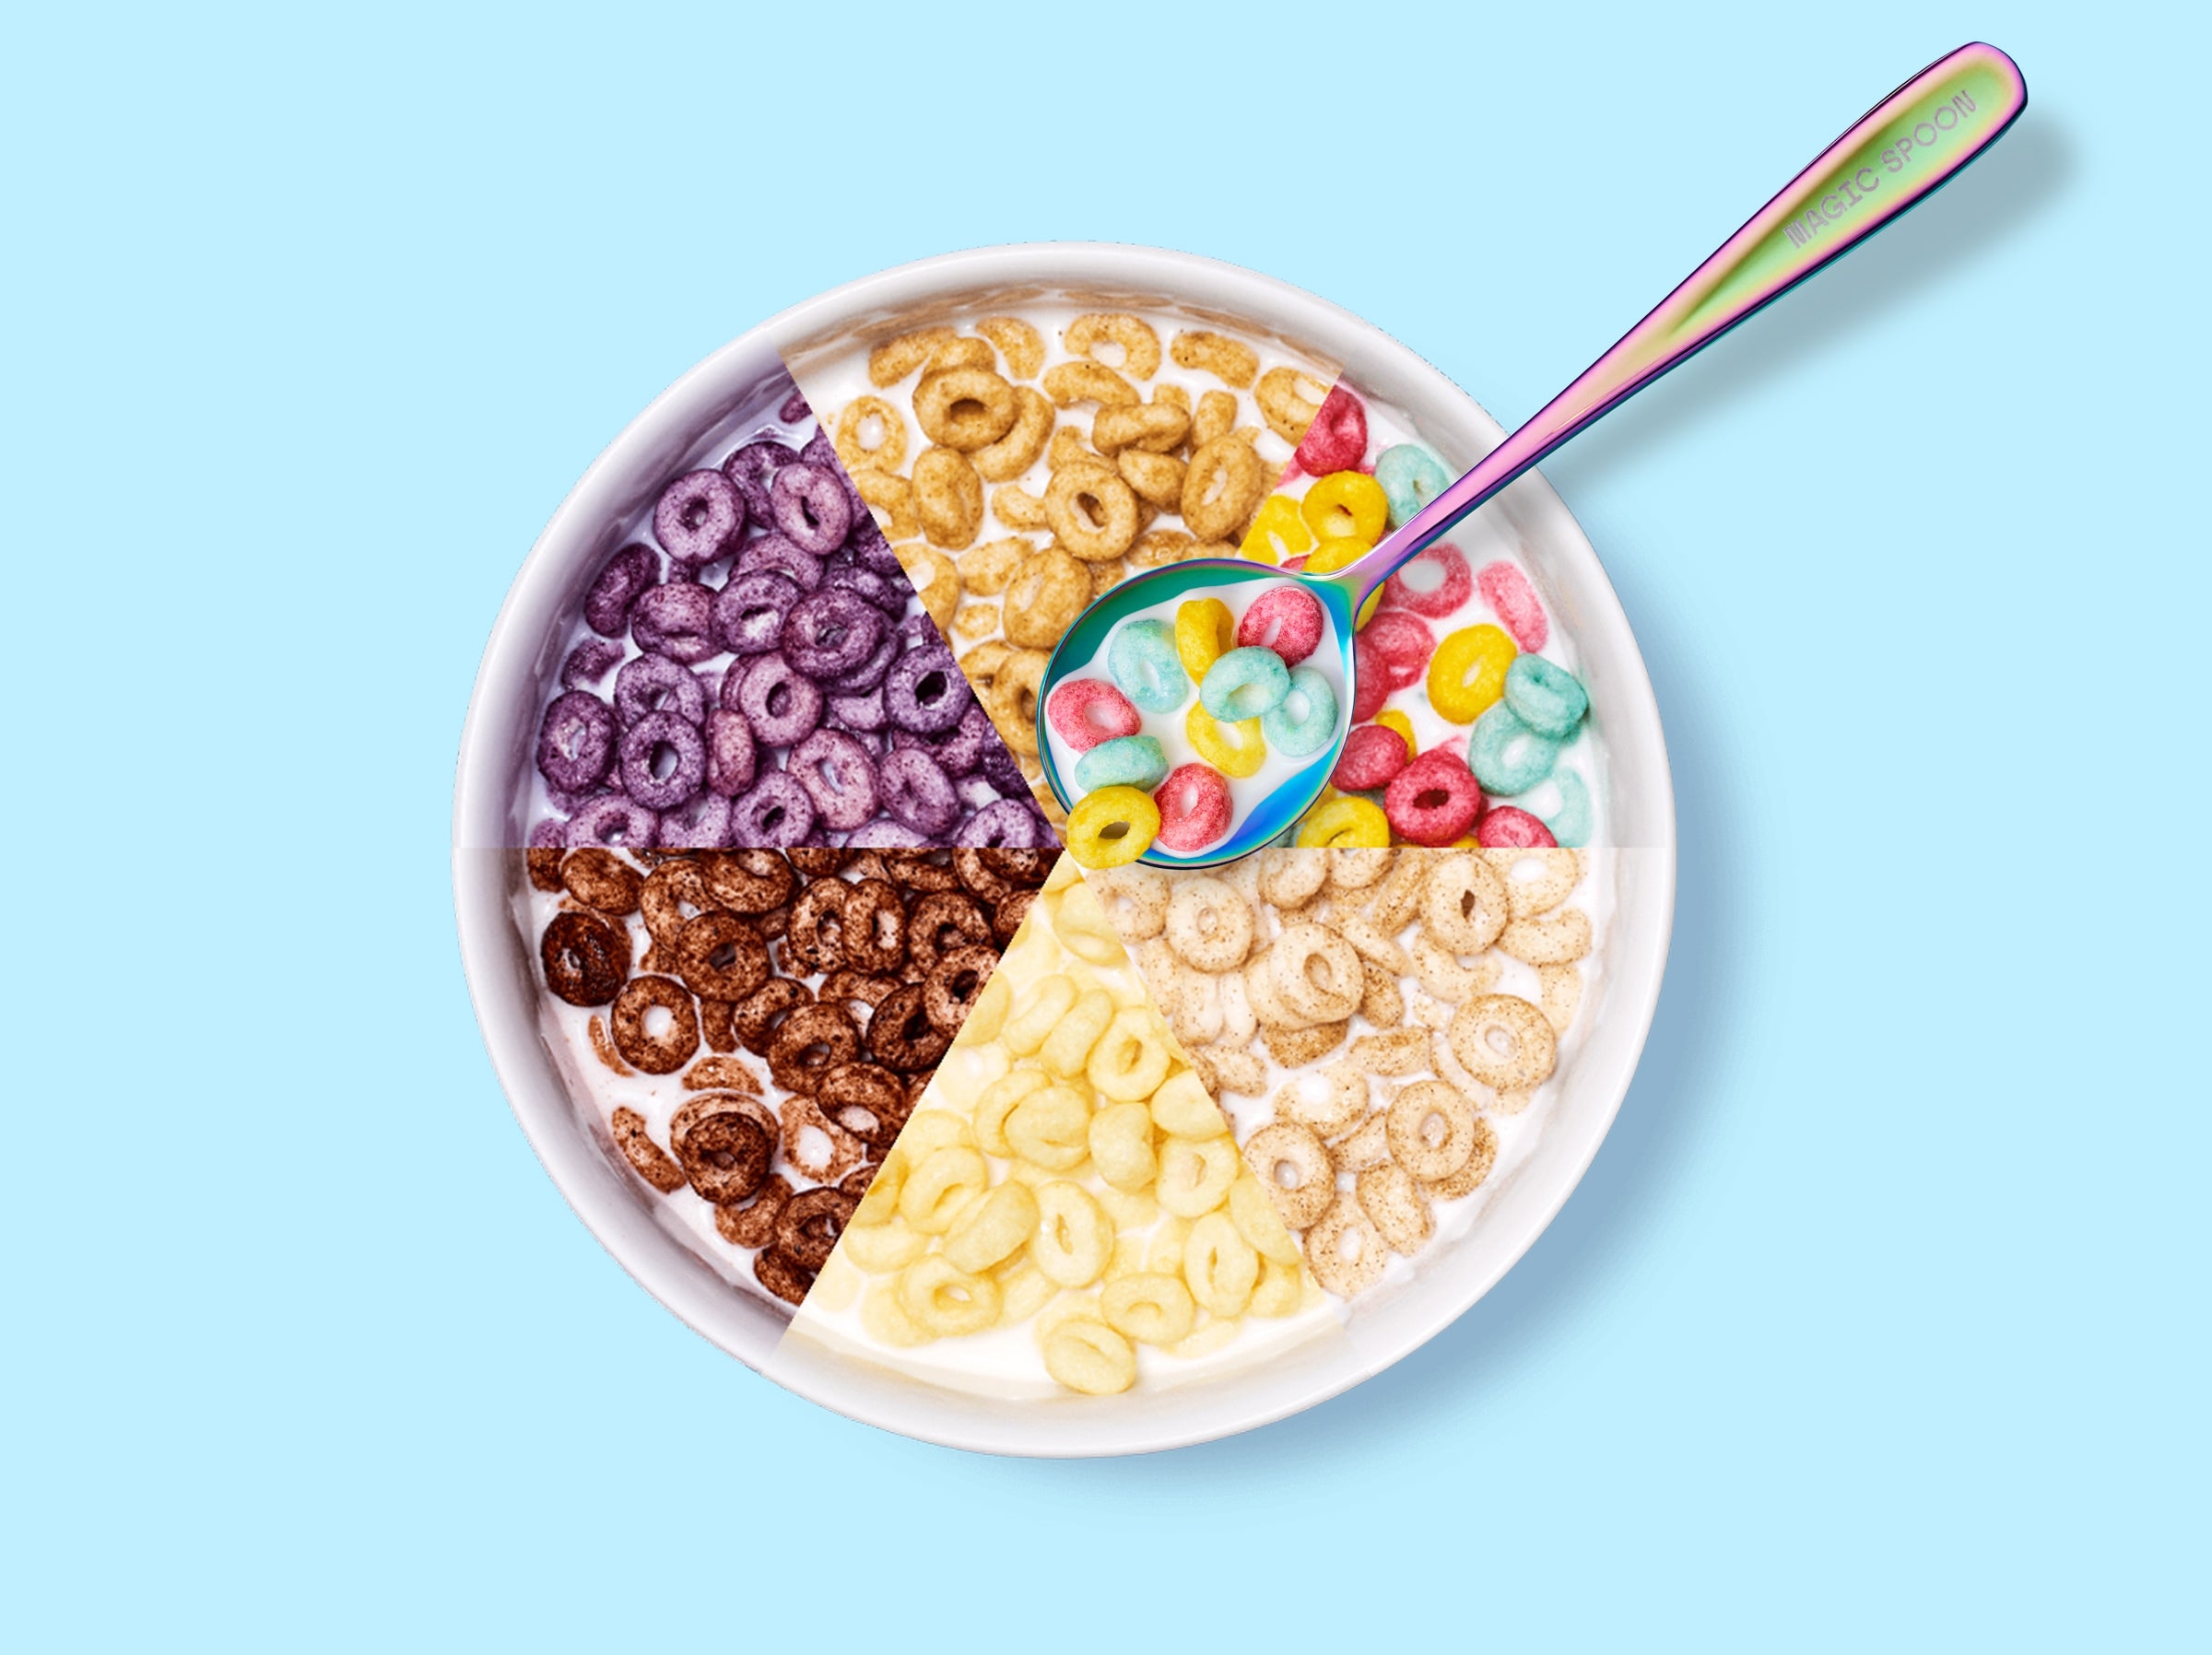 6 different cereals in a bowl